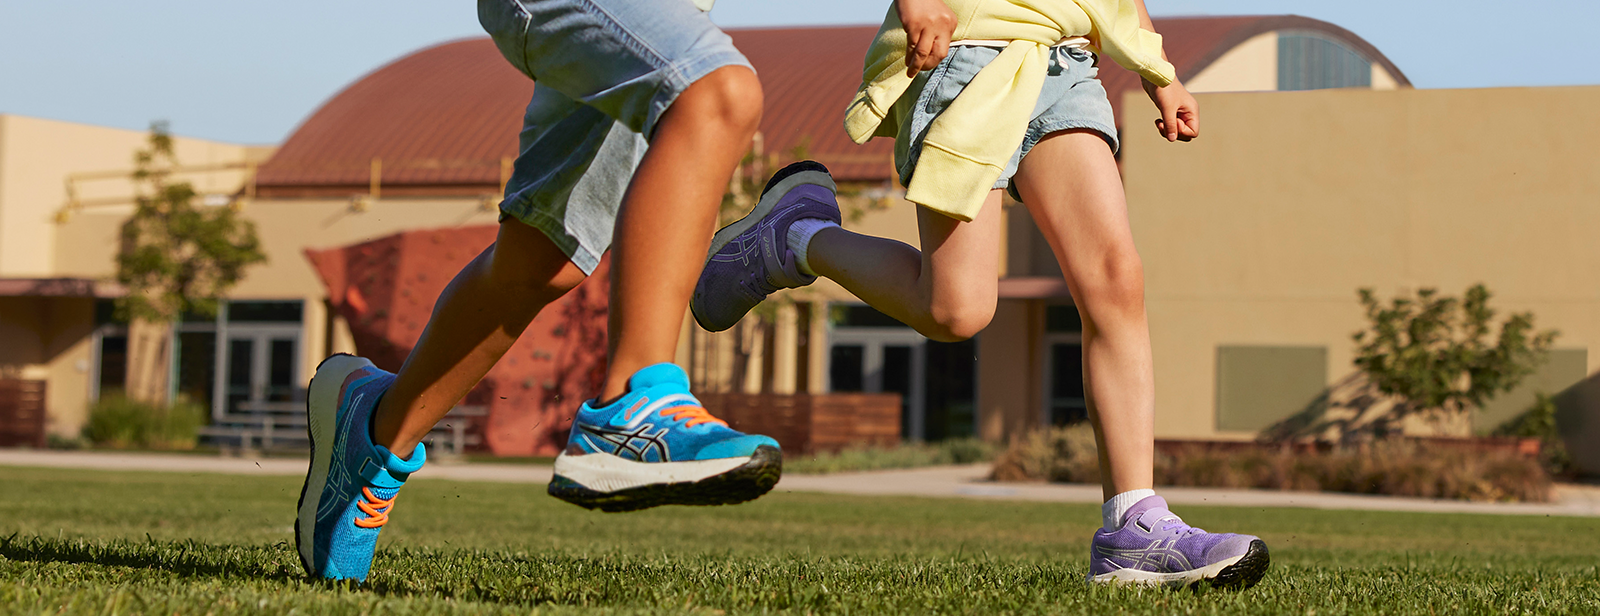 Running Shoes for Kids: A Guide | ASICS